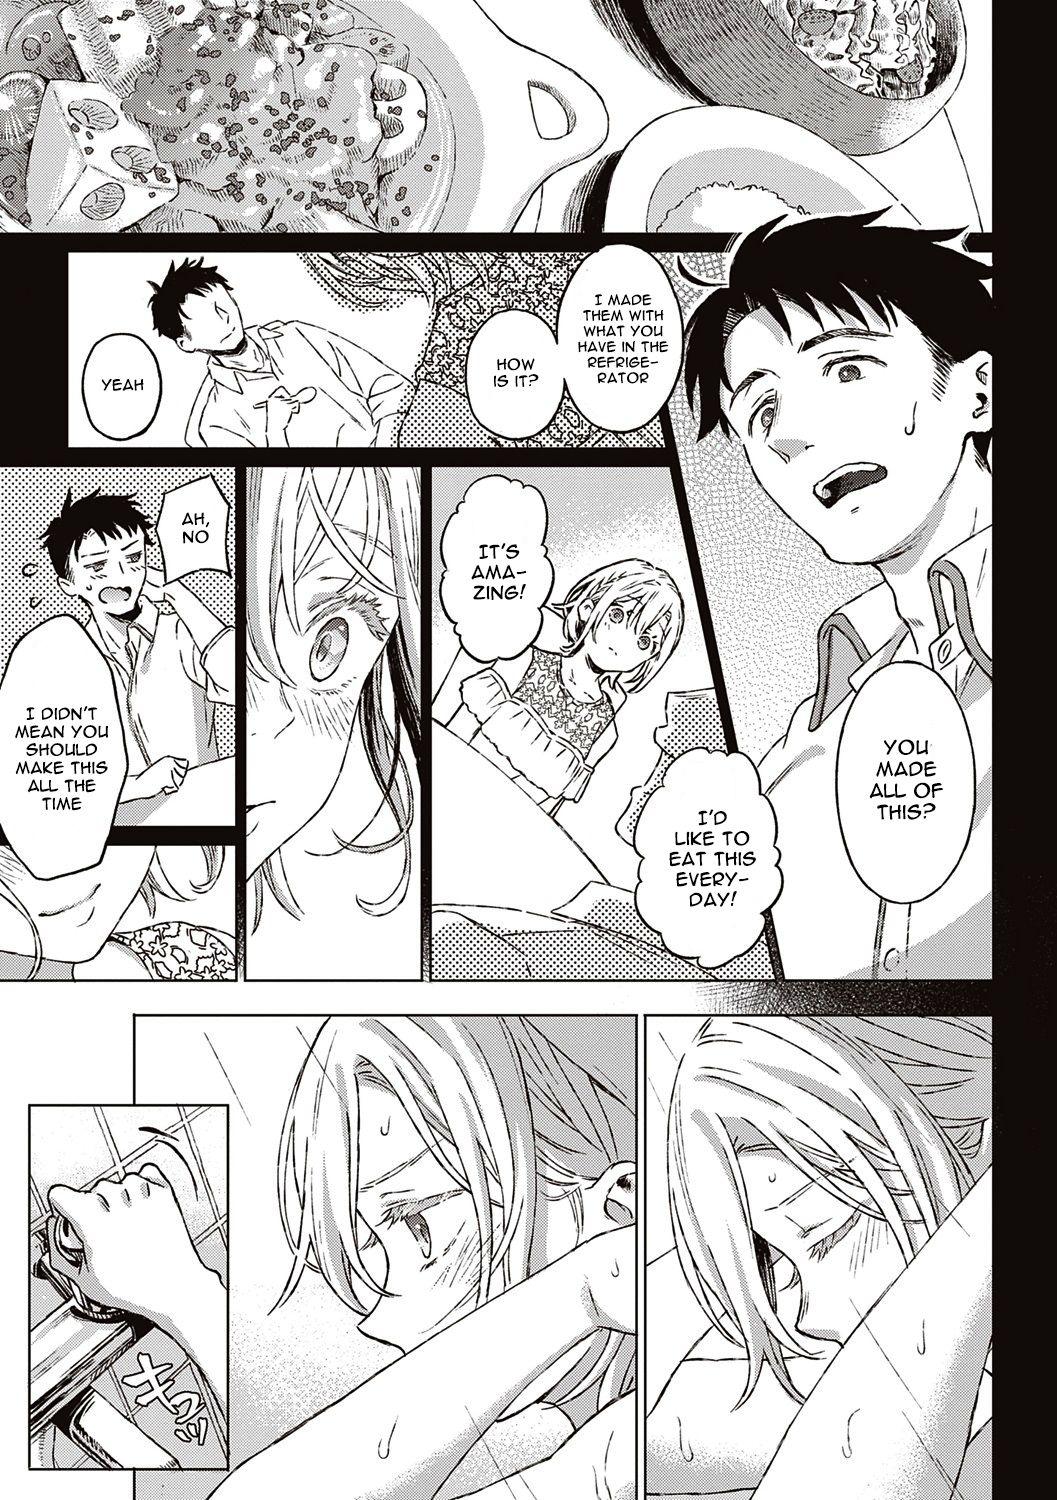 Small Tits Shinsou no Hanayome + After Story | Closeted Bride + After Story Wife - Page 11